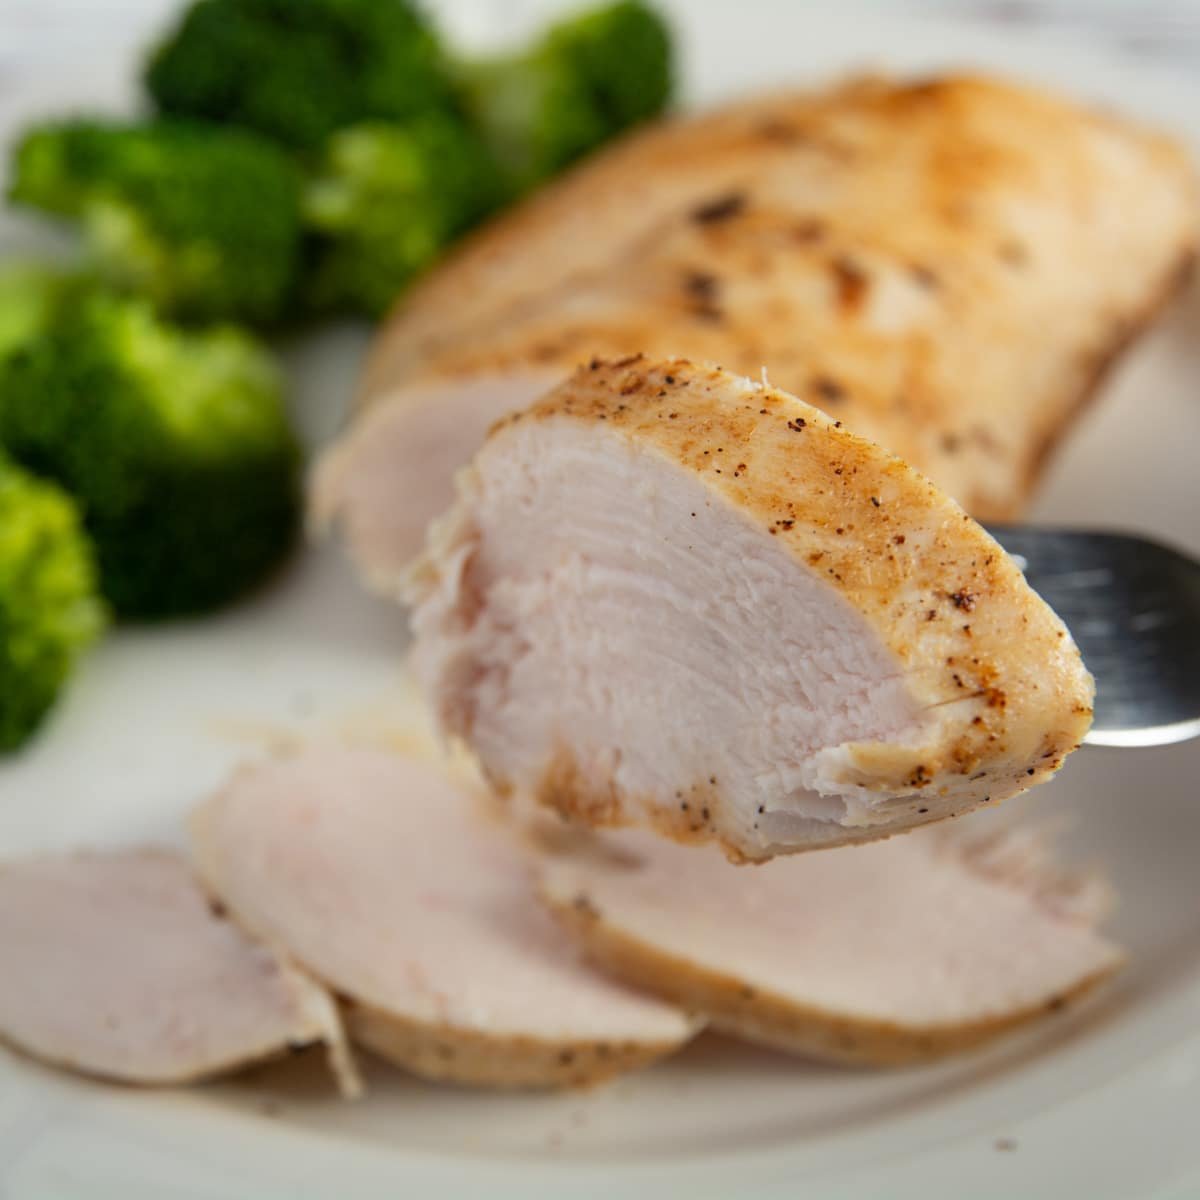 A slice of cooked chicken on a fork